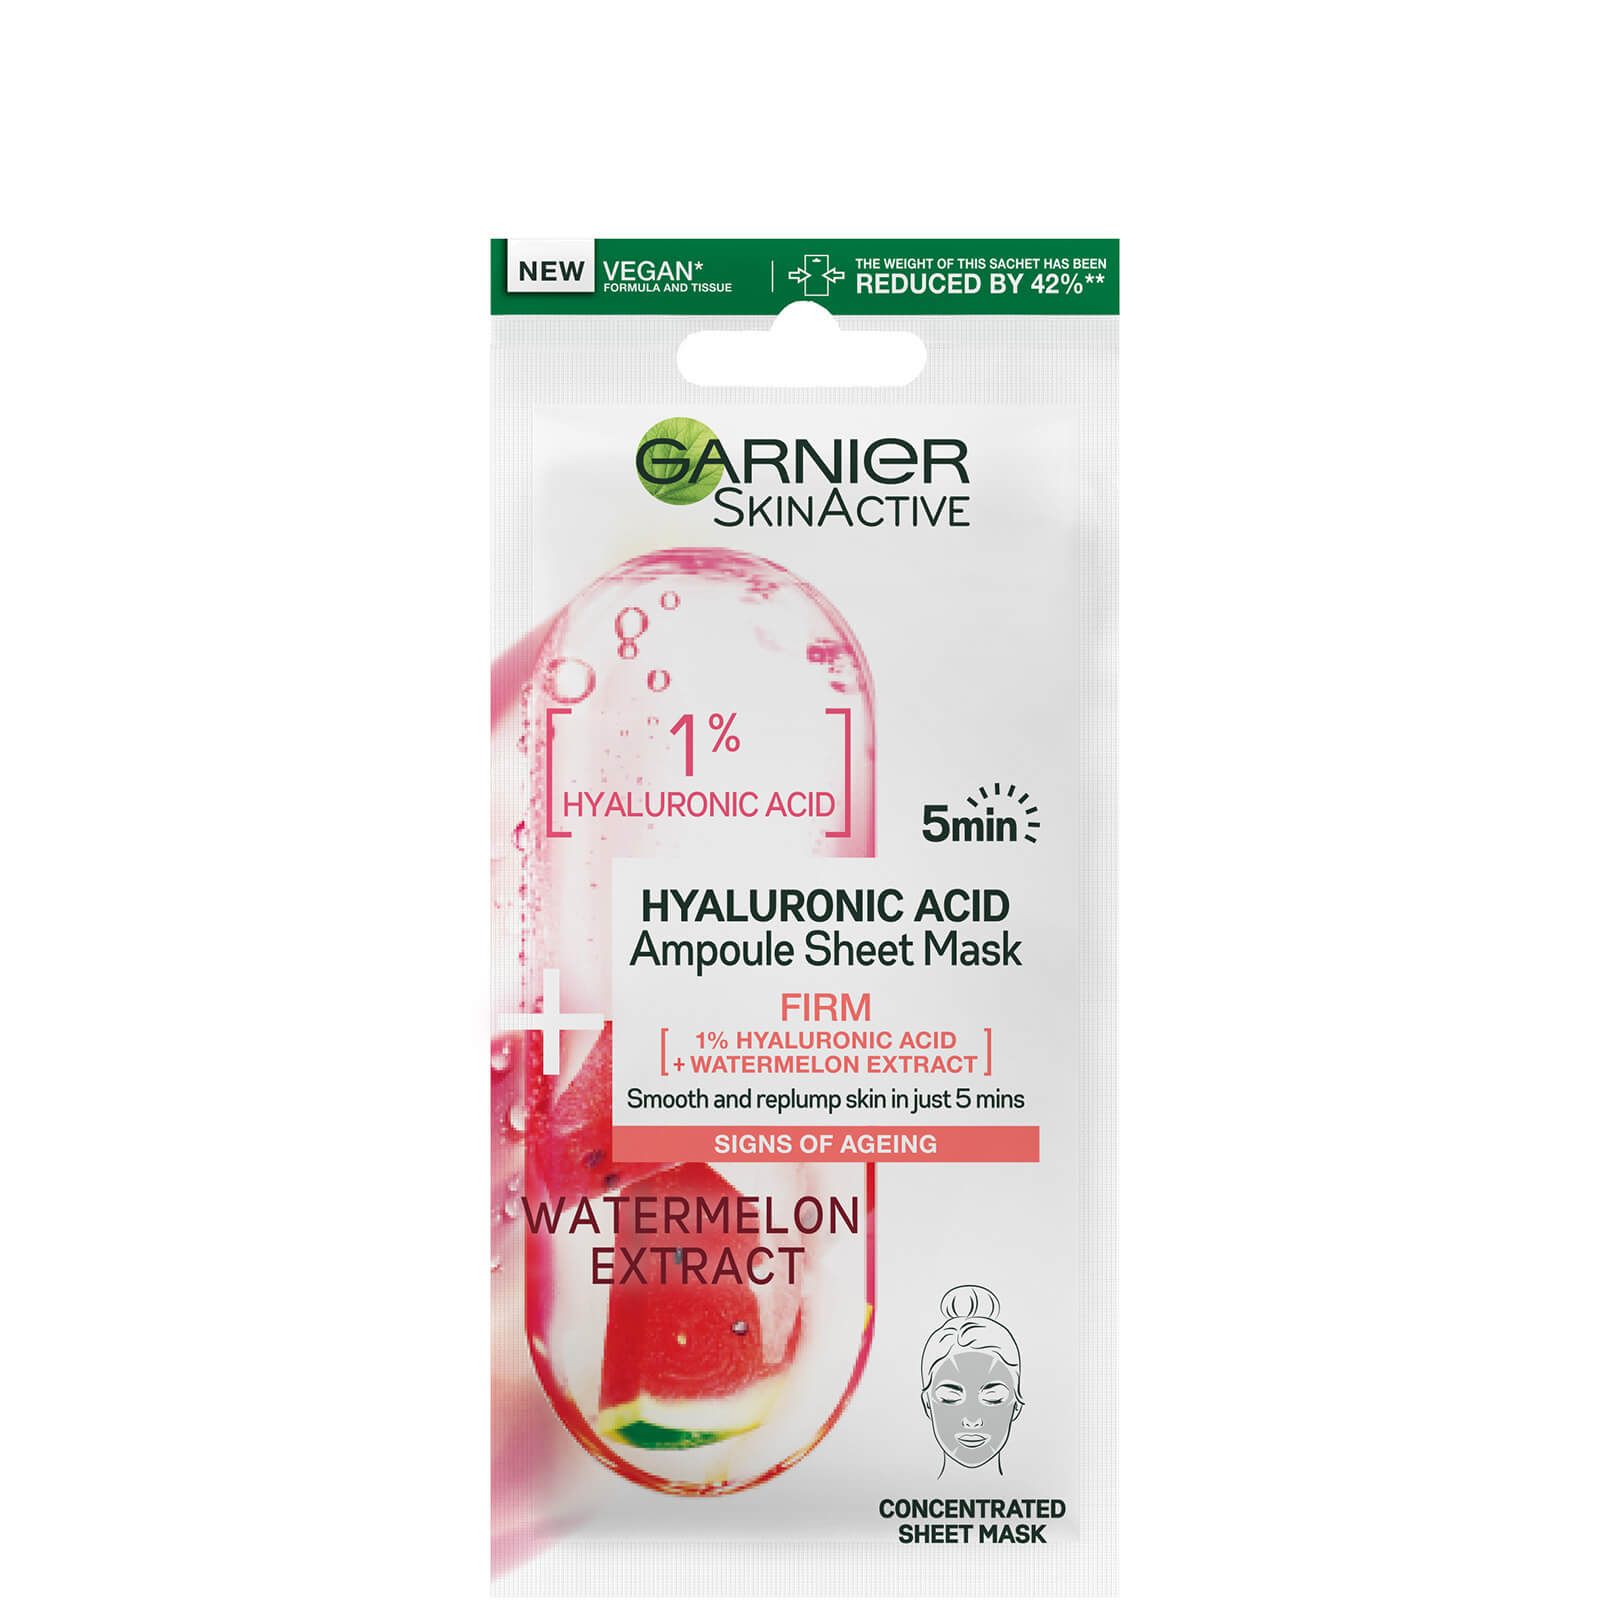 Garnier SkinActive Firming Ampoule Sheet Mask - Watermelon and 1% Hyaluronic Acid 15g product